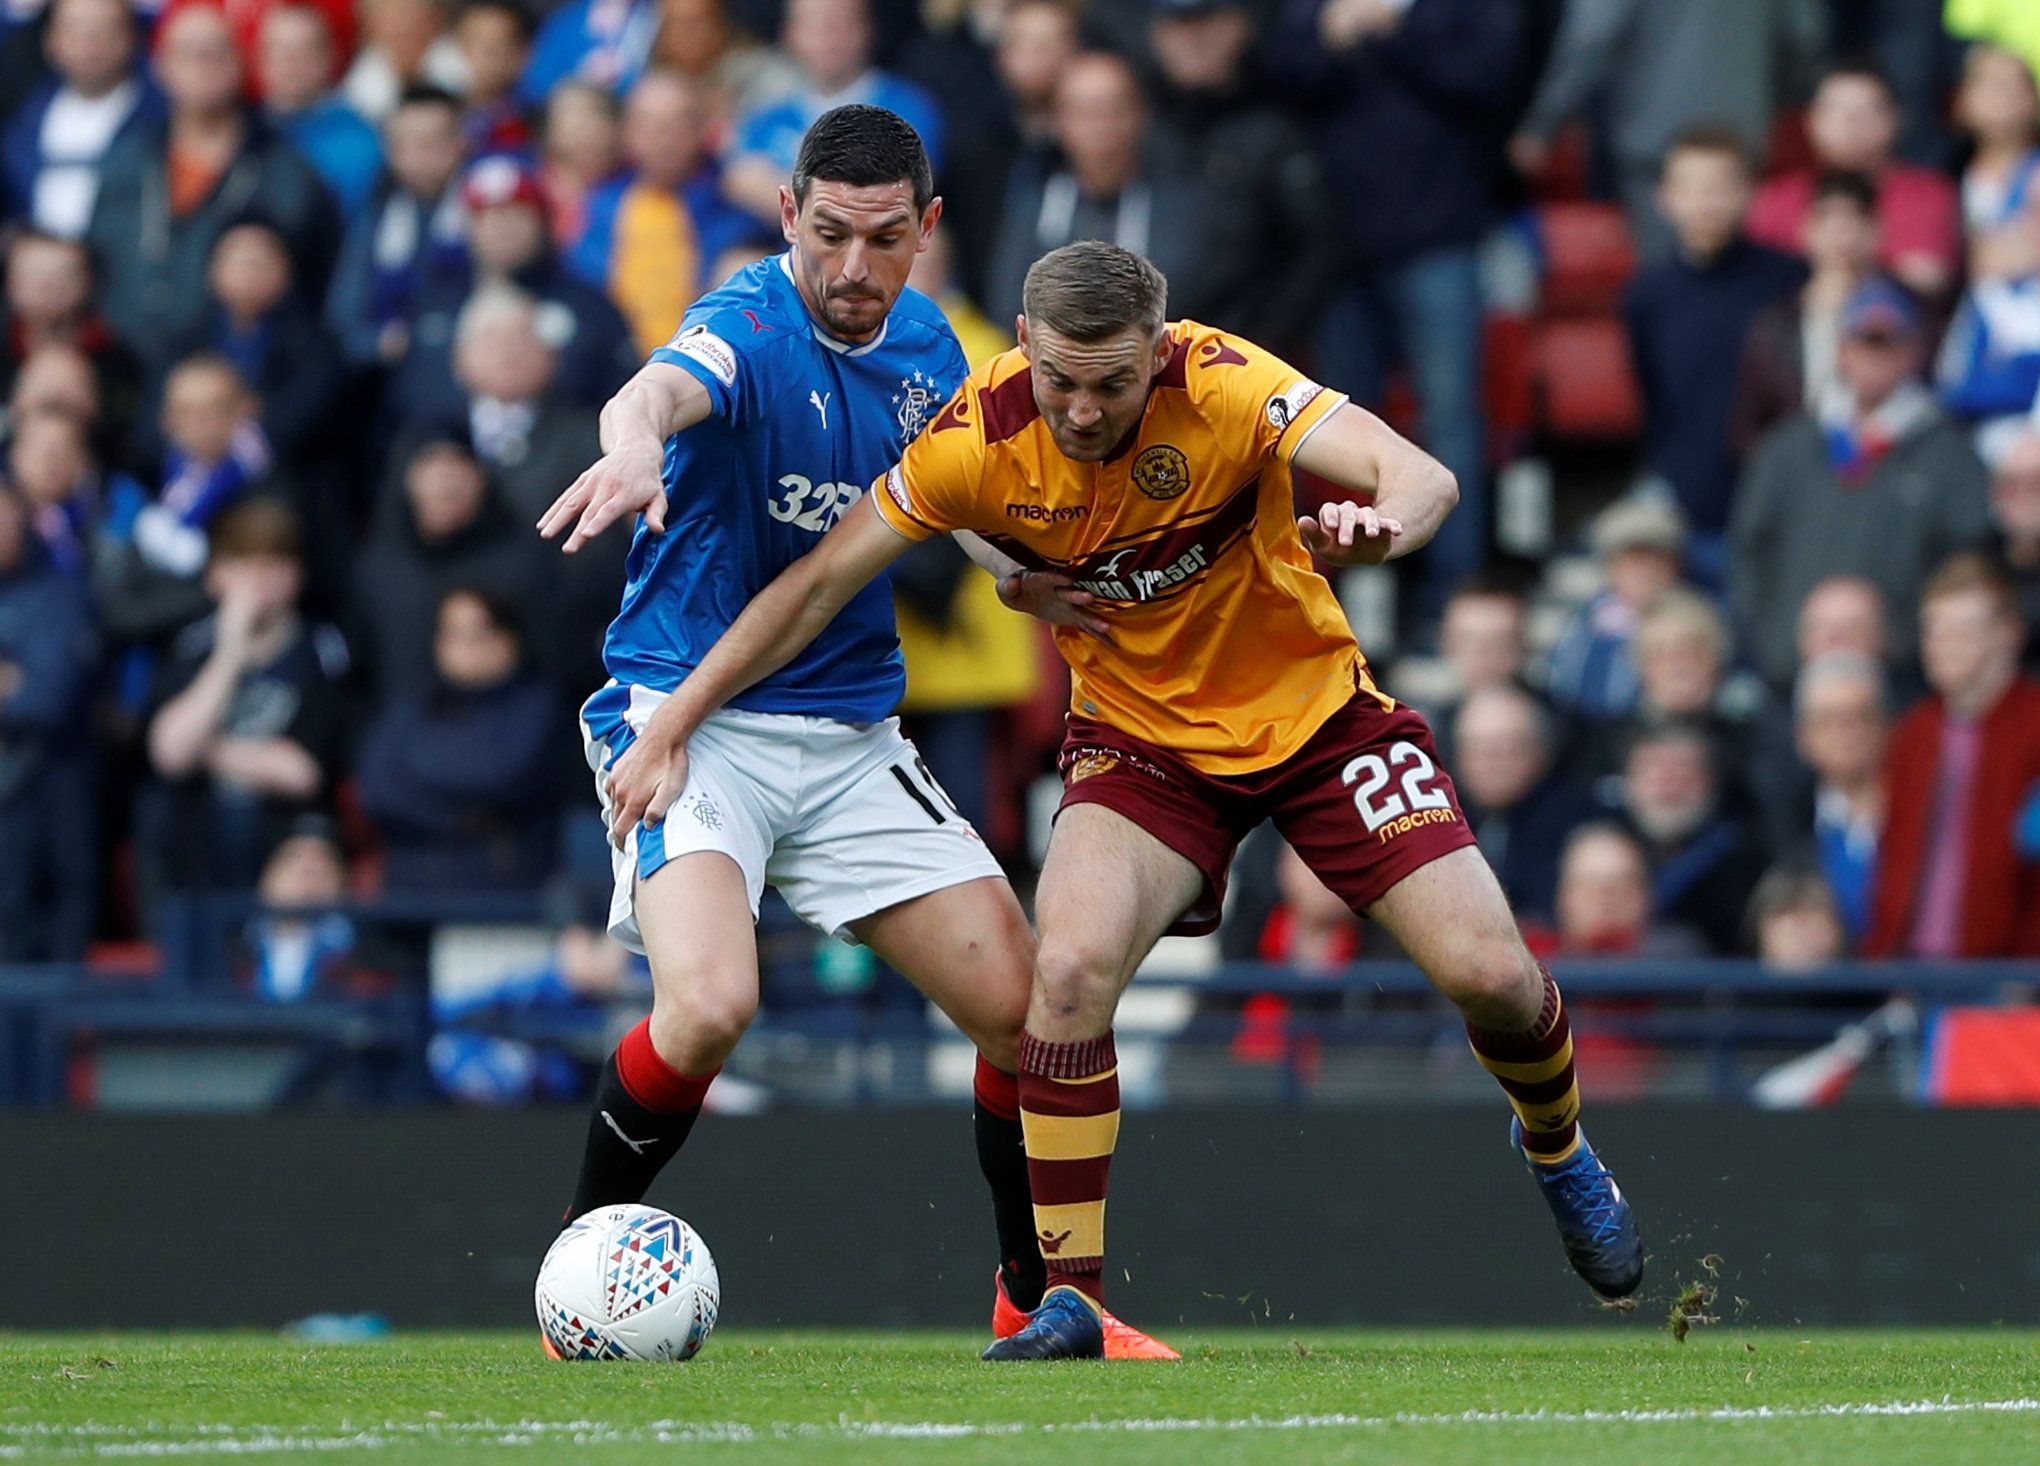 Soccer Football - Scottish League Cup Semi Final - Rangers vs Motherwell - Hampden Park, Glasgow, Britain - October 22, 2017   Rangers’ Graham Dorrans in action with Motherwell’s Allan Campbell     REUTERS/Russell Cheyne